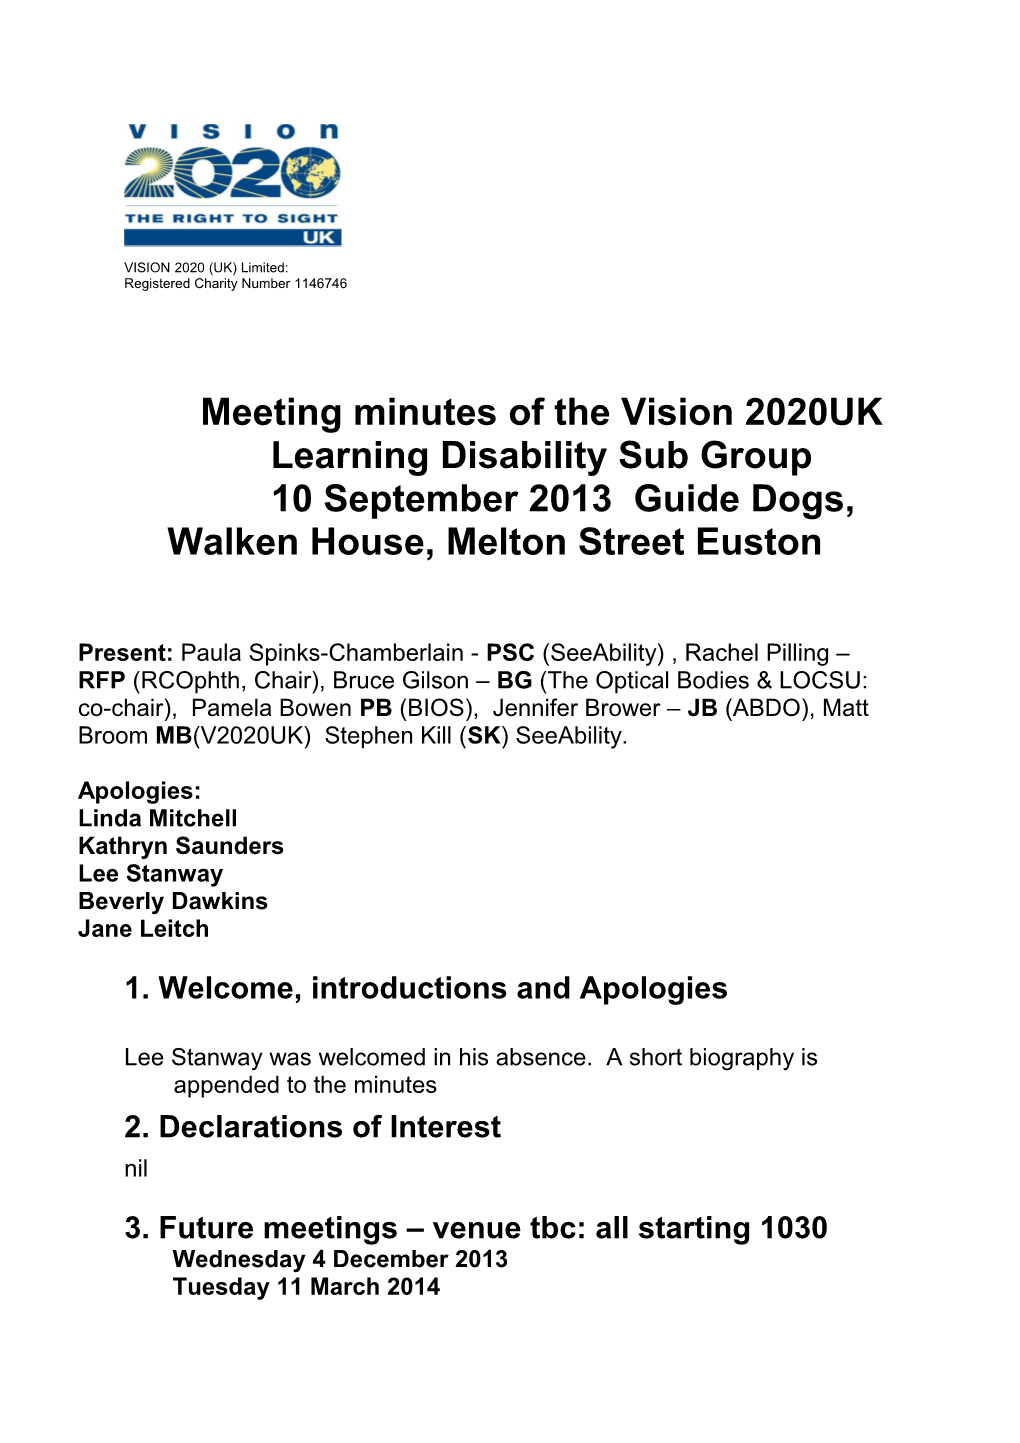 Meeting Minutes of the Vision 2020UK